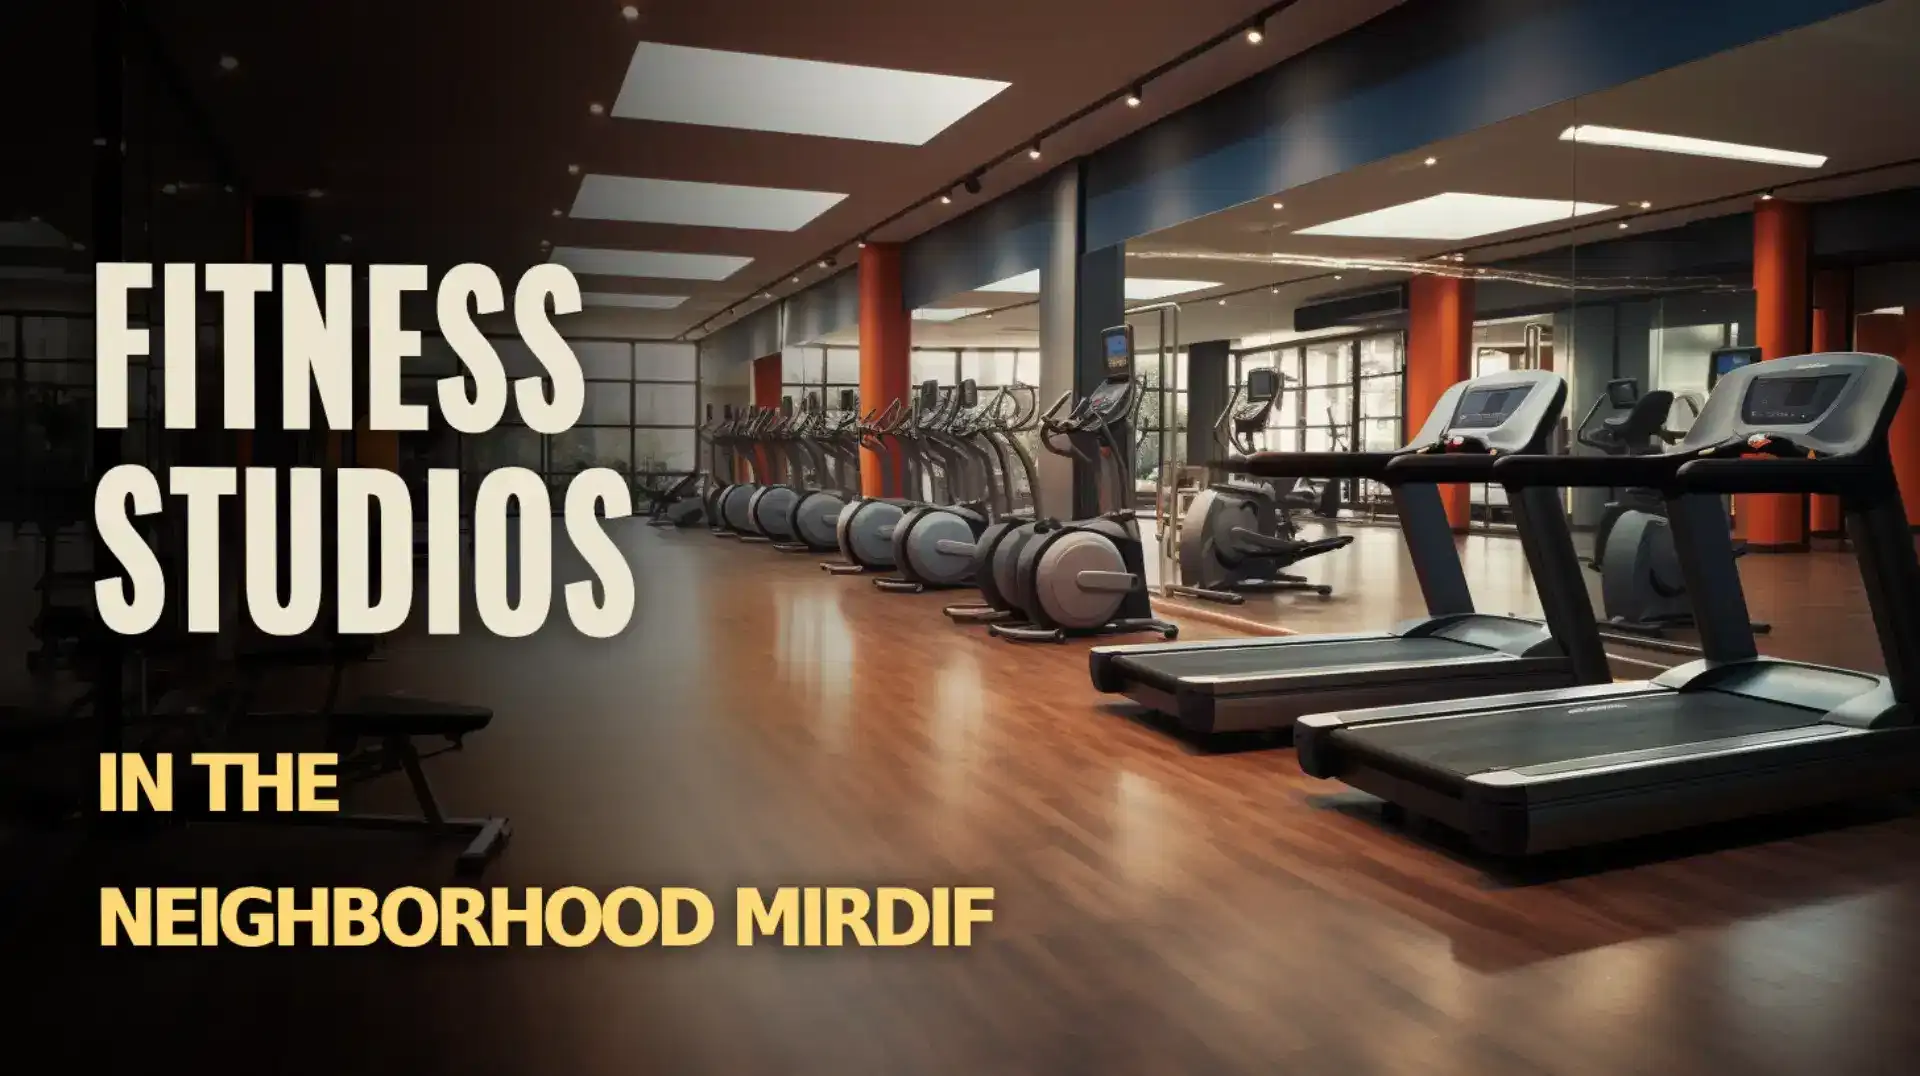 Dynamic Workouts Unleashed - Fitness Studios in Mirdif